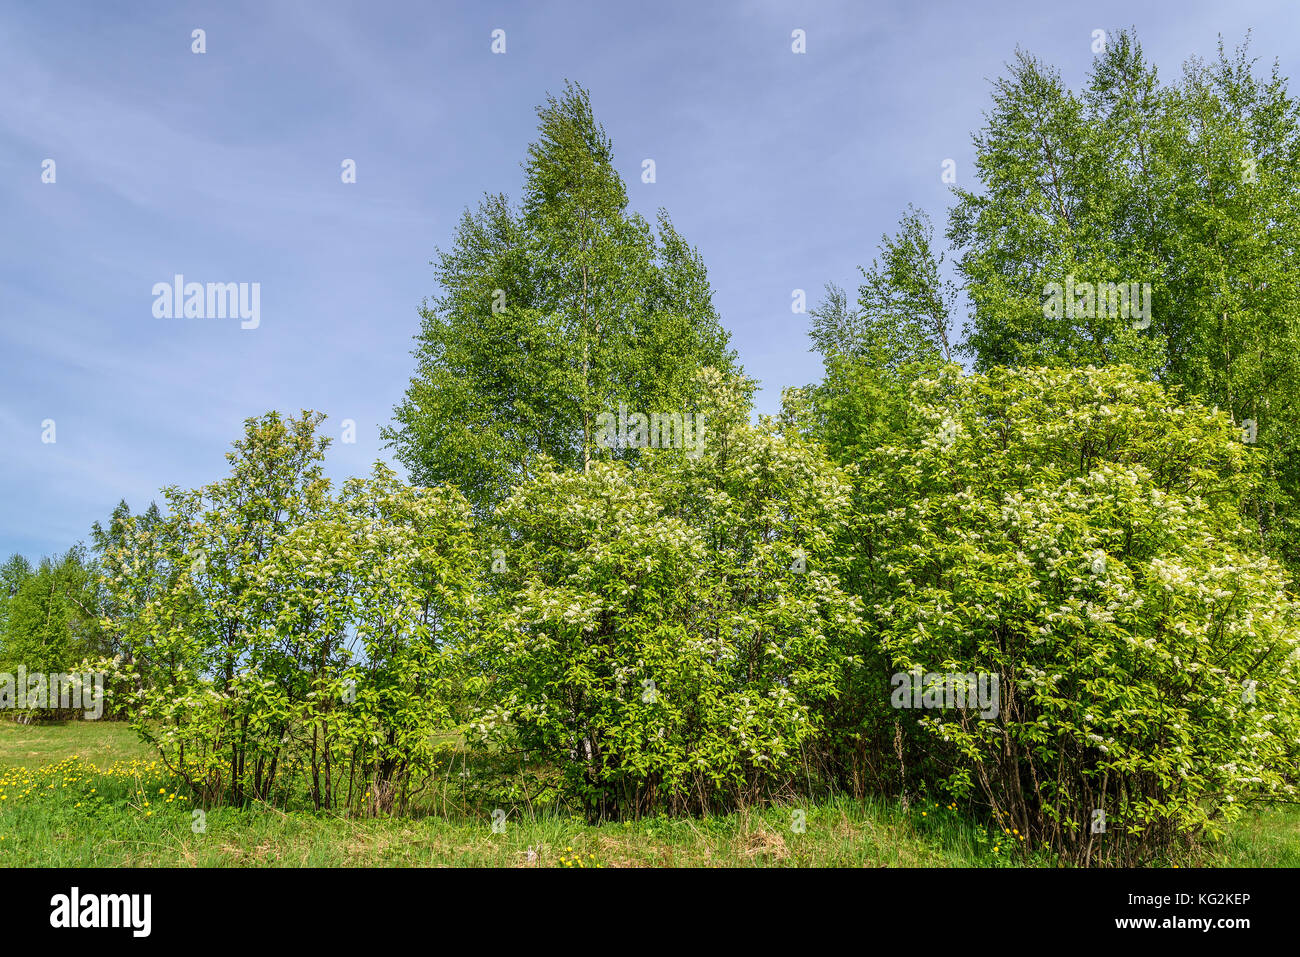 A beautiful natural background with bird-cherry tree with white flowers, birches with green foliage and yellow wildflowers in a grove in spring Stock Photo